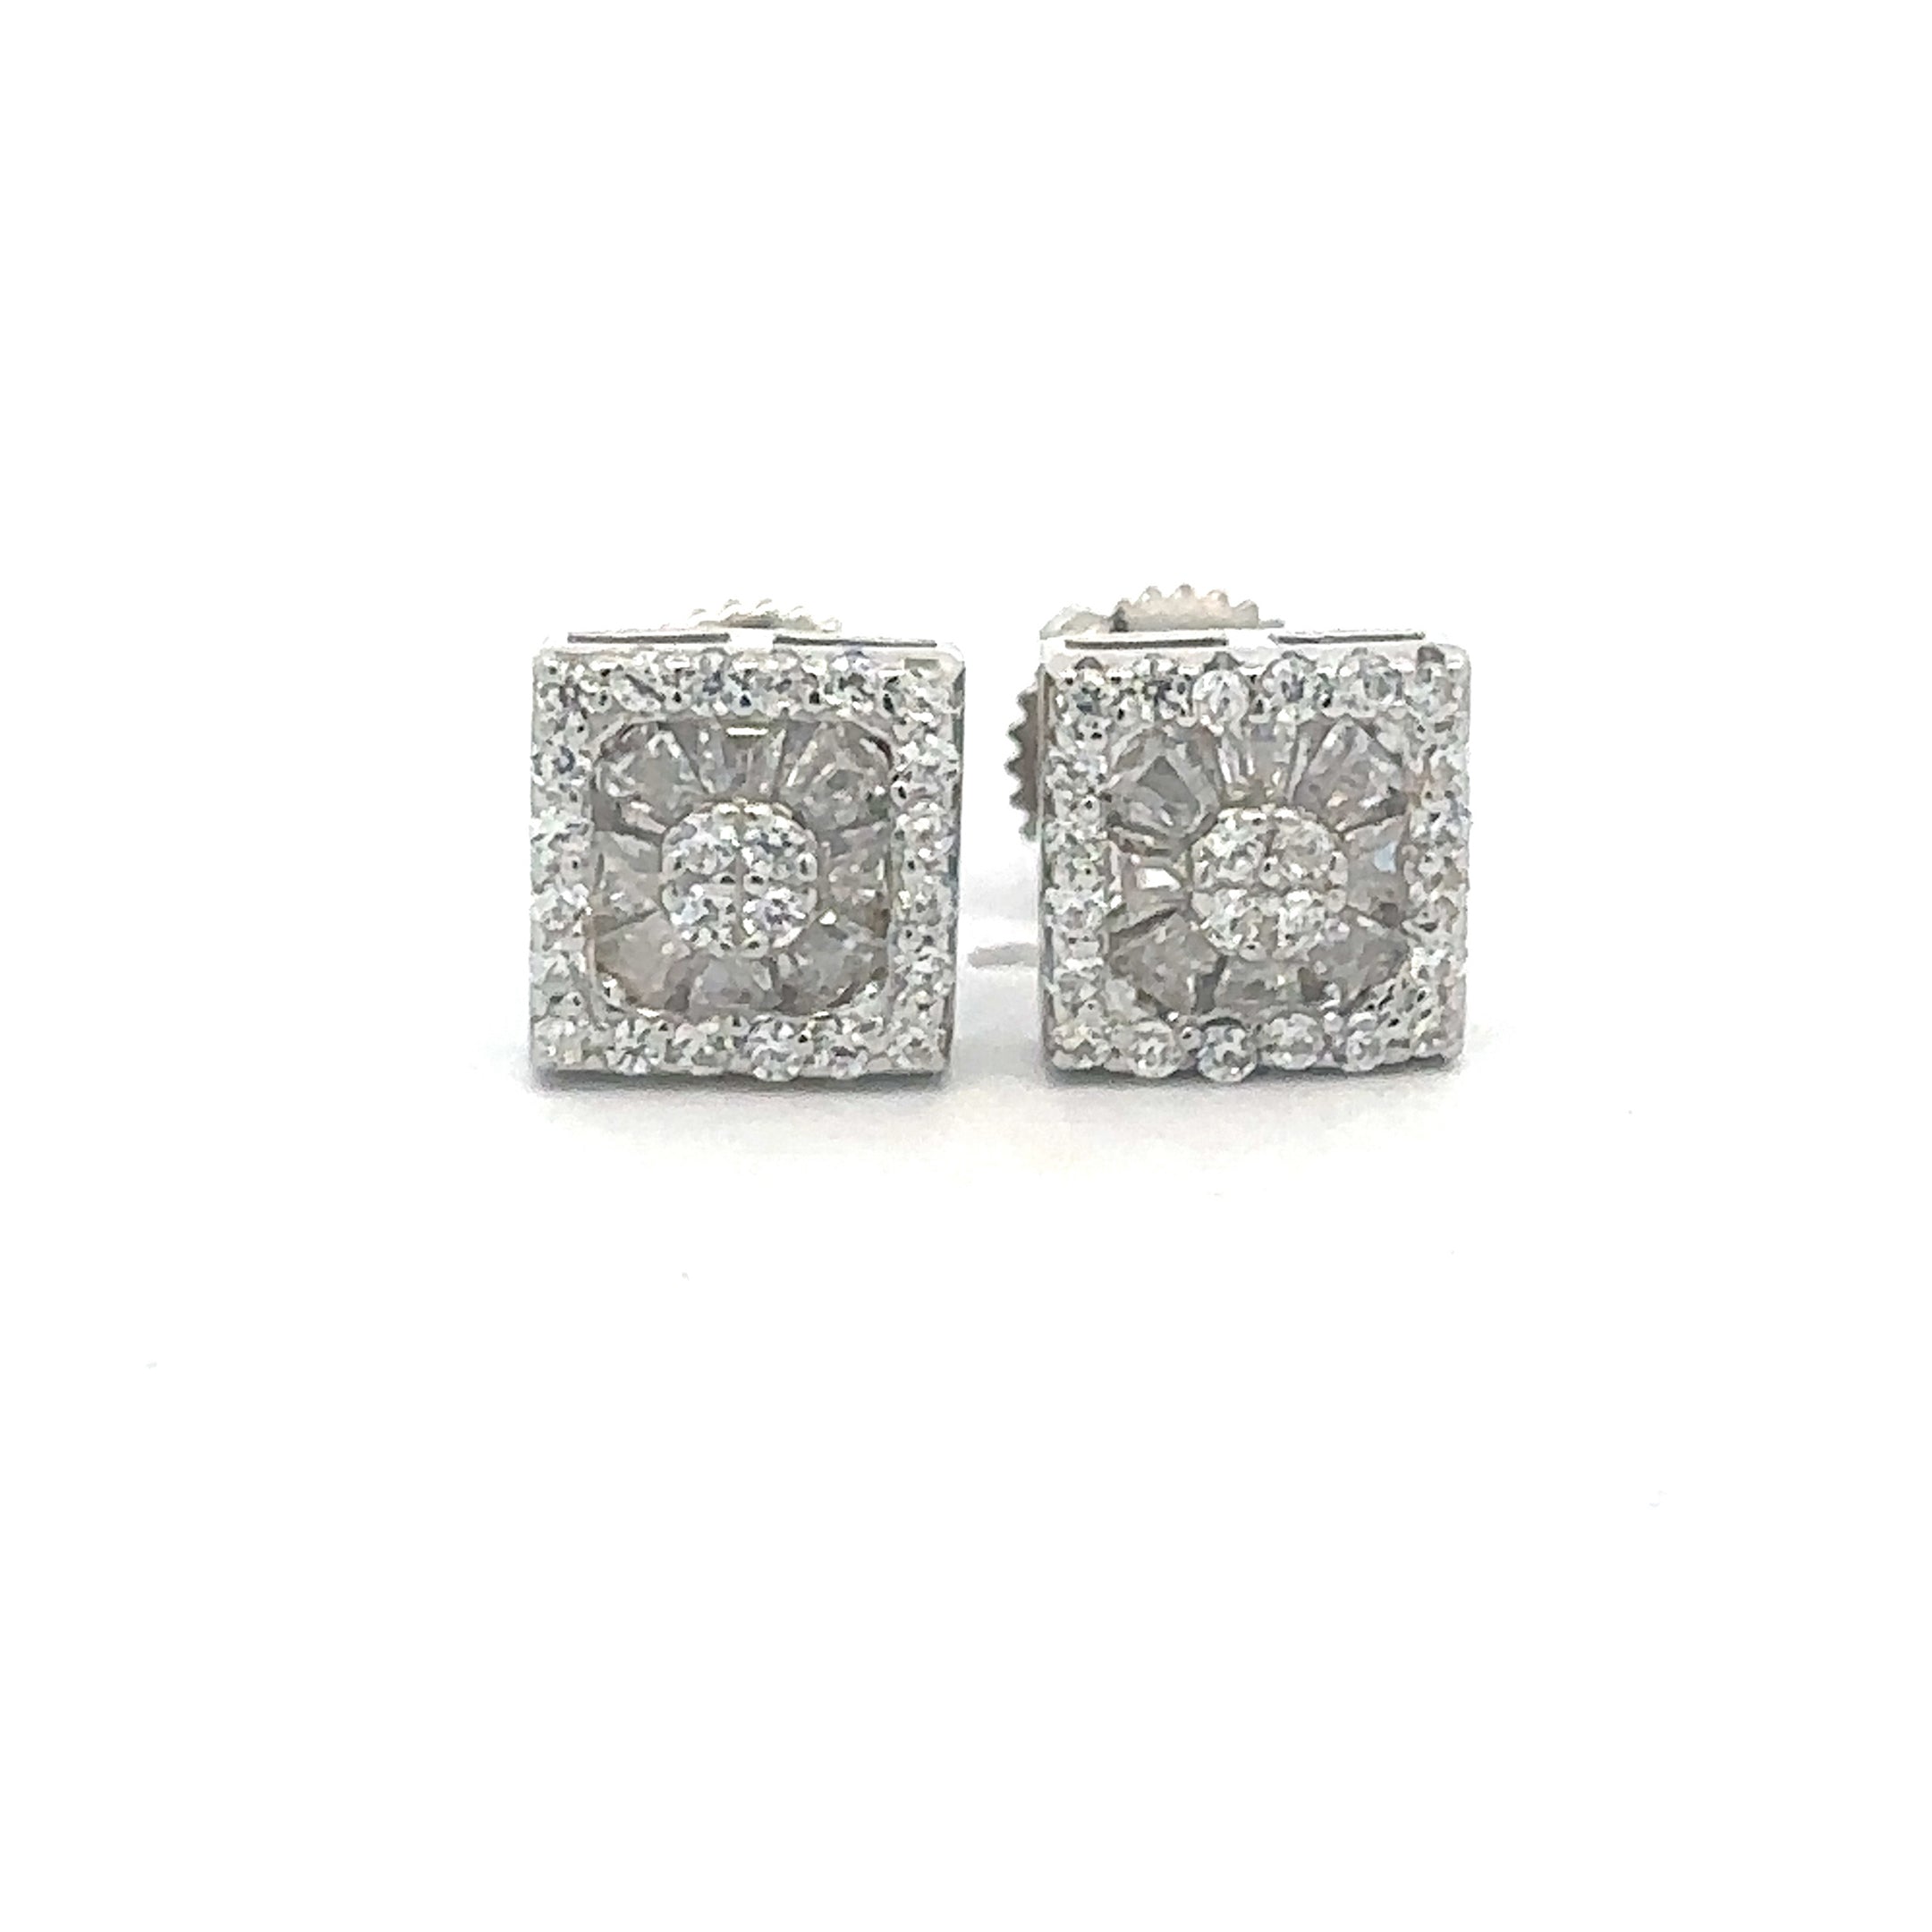 ISADORA 925 CZ RHODIUM ICED OUT EARRINGS | 9219521